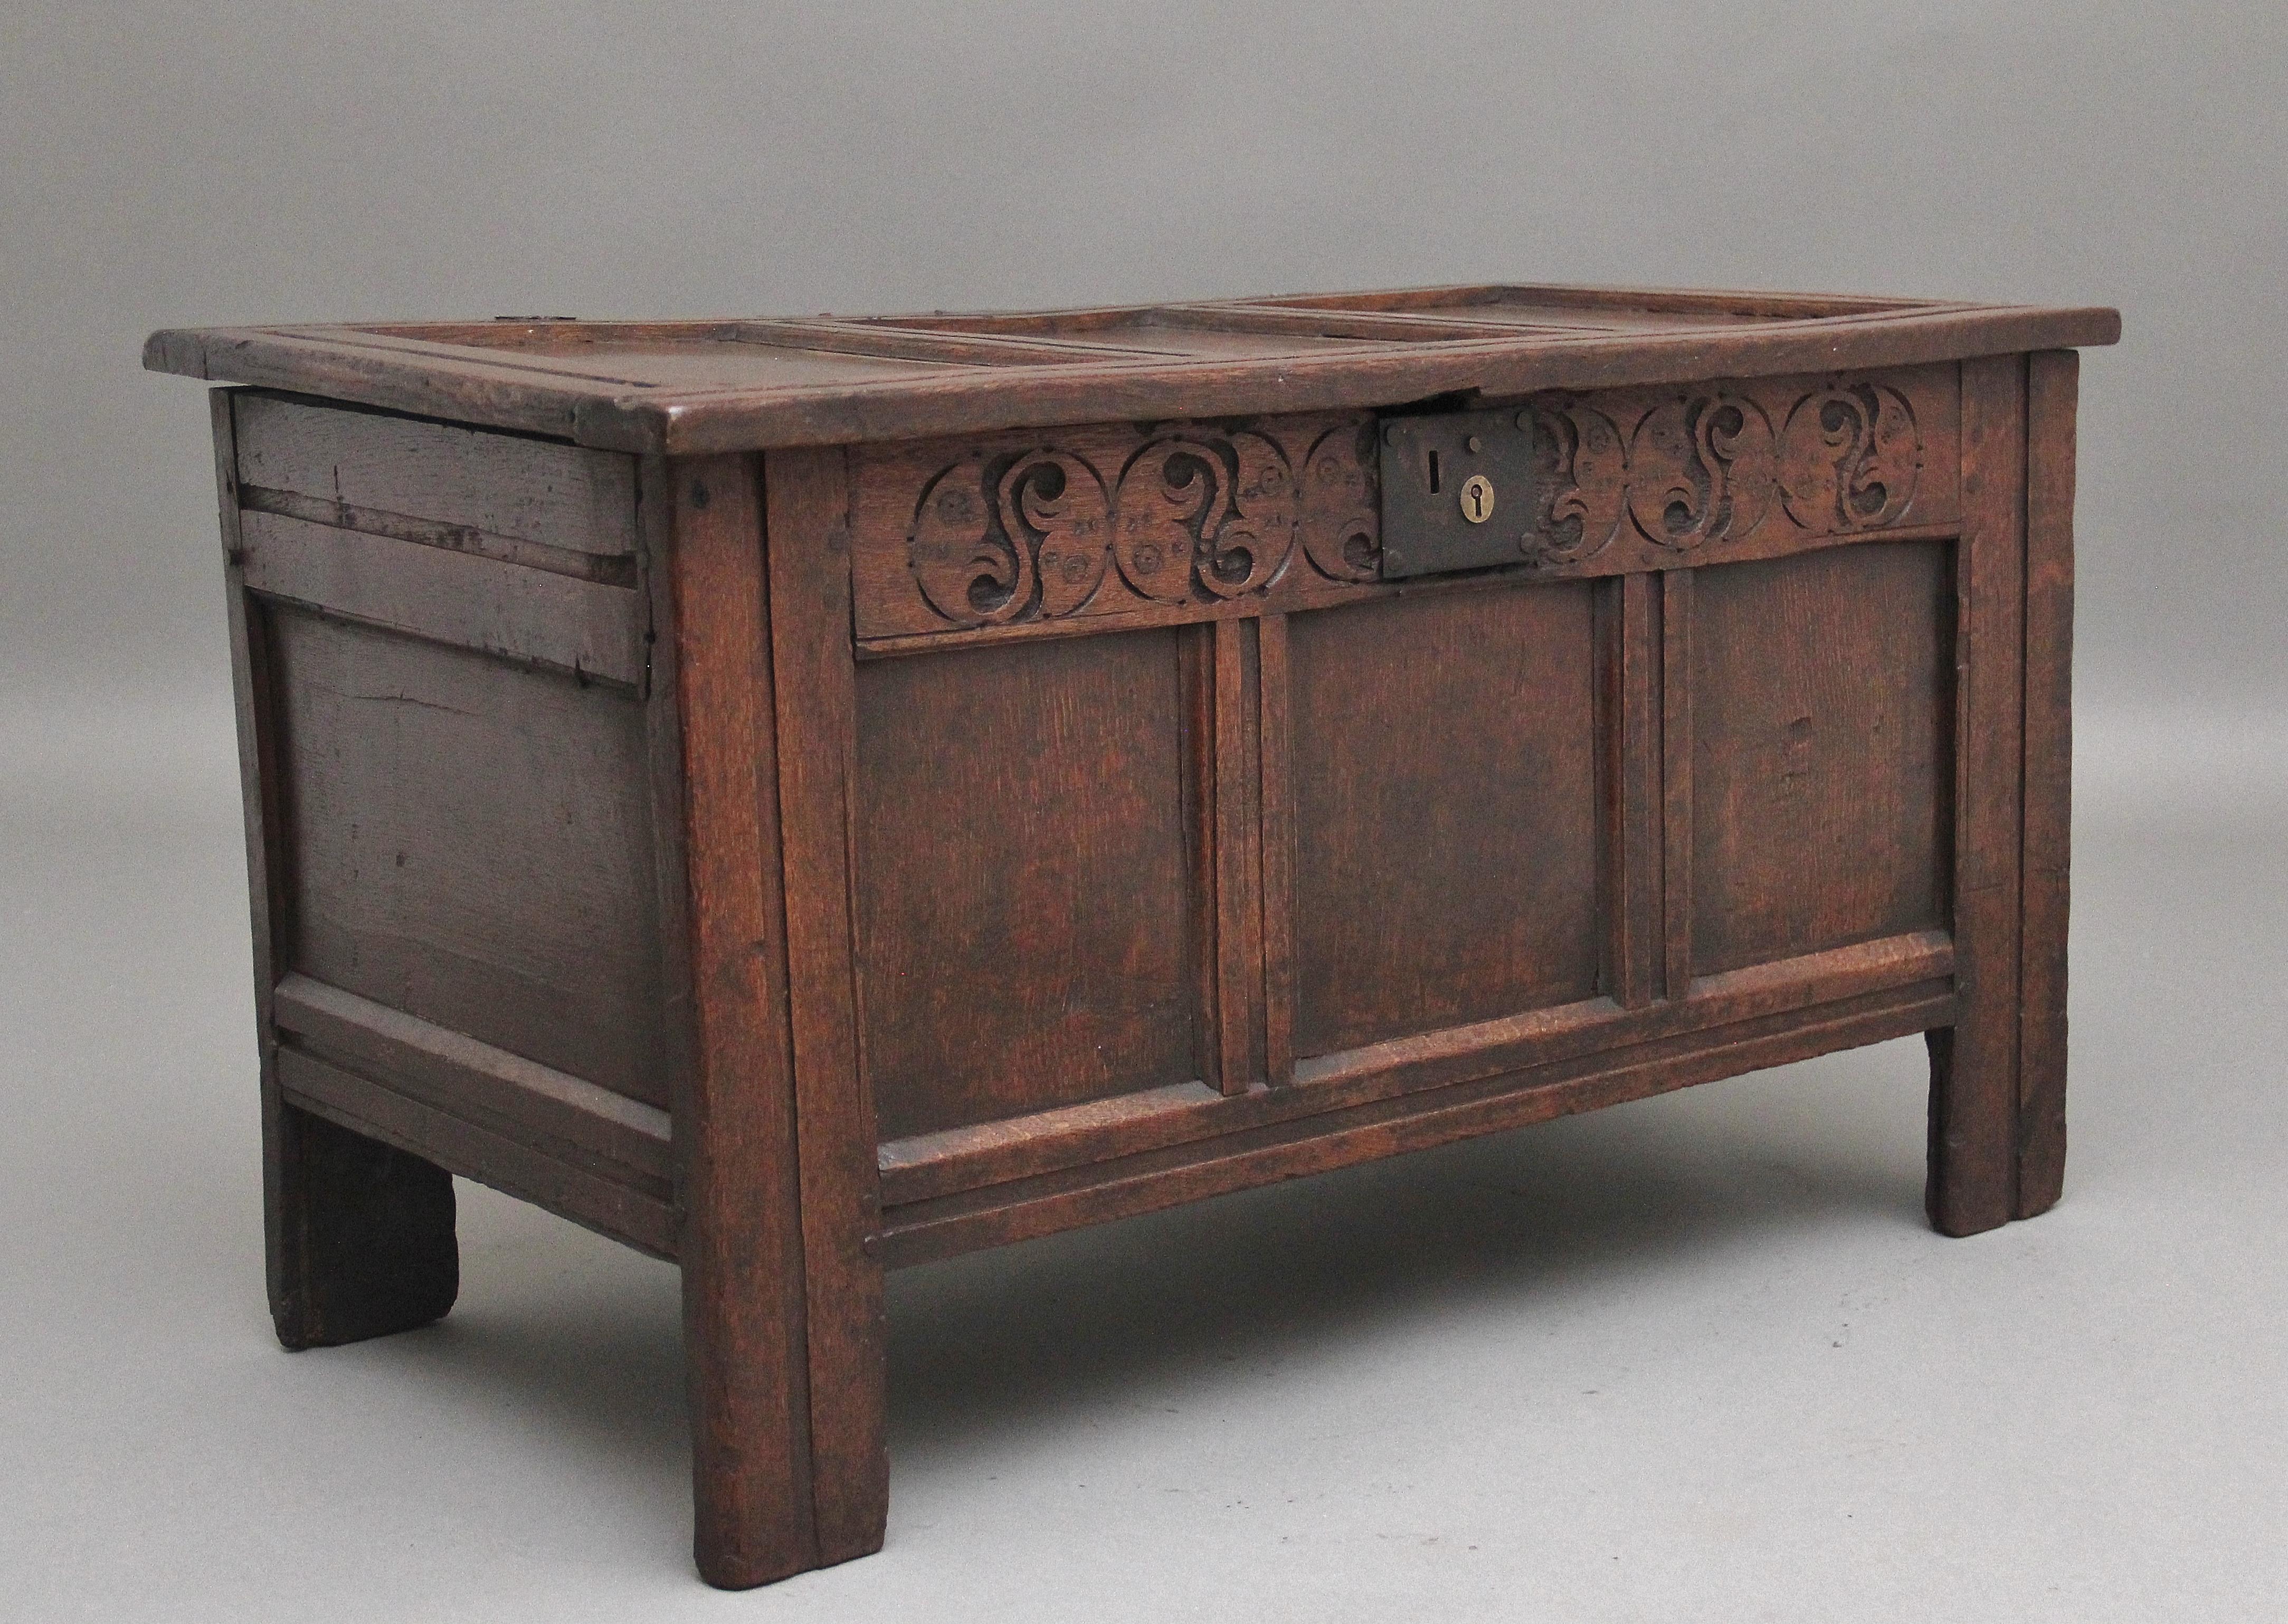 Early 18th Century oak coffer with the hinged three panelled top opening to reveal a large compartment space, the three panelled front having wonderful decorative carving, panelled sides, standing on square legs.  This coffer has a lovely warm oak